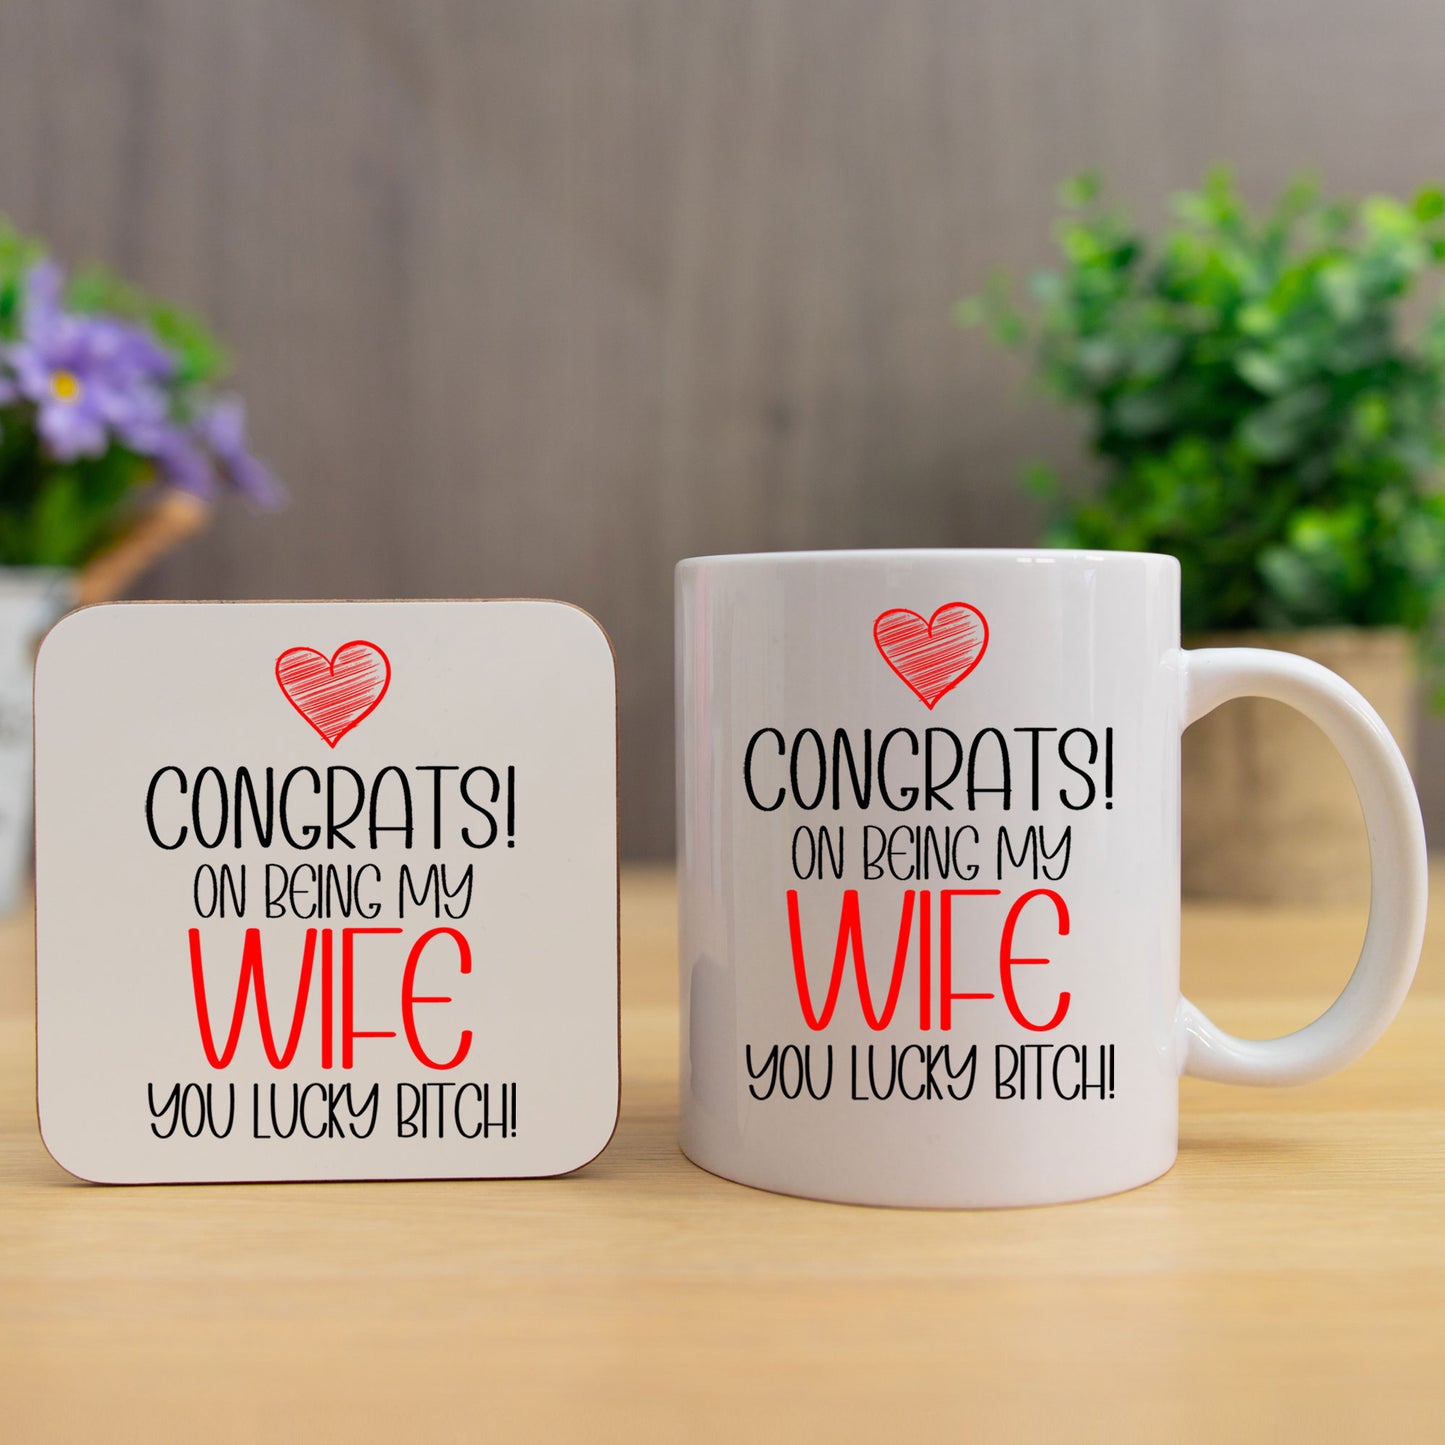 Congrats On Being My Wife Mug and/or Coaster Gift  - Always Looking Good - Lucky Bitch Mug & Coaster Set  